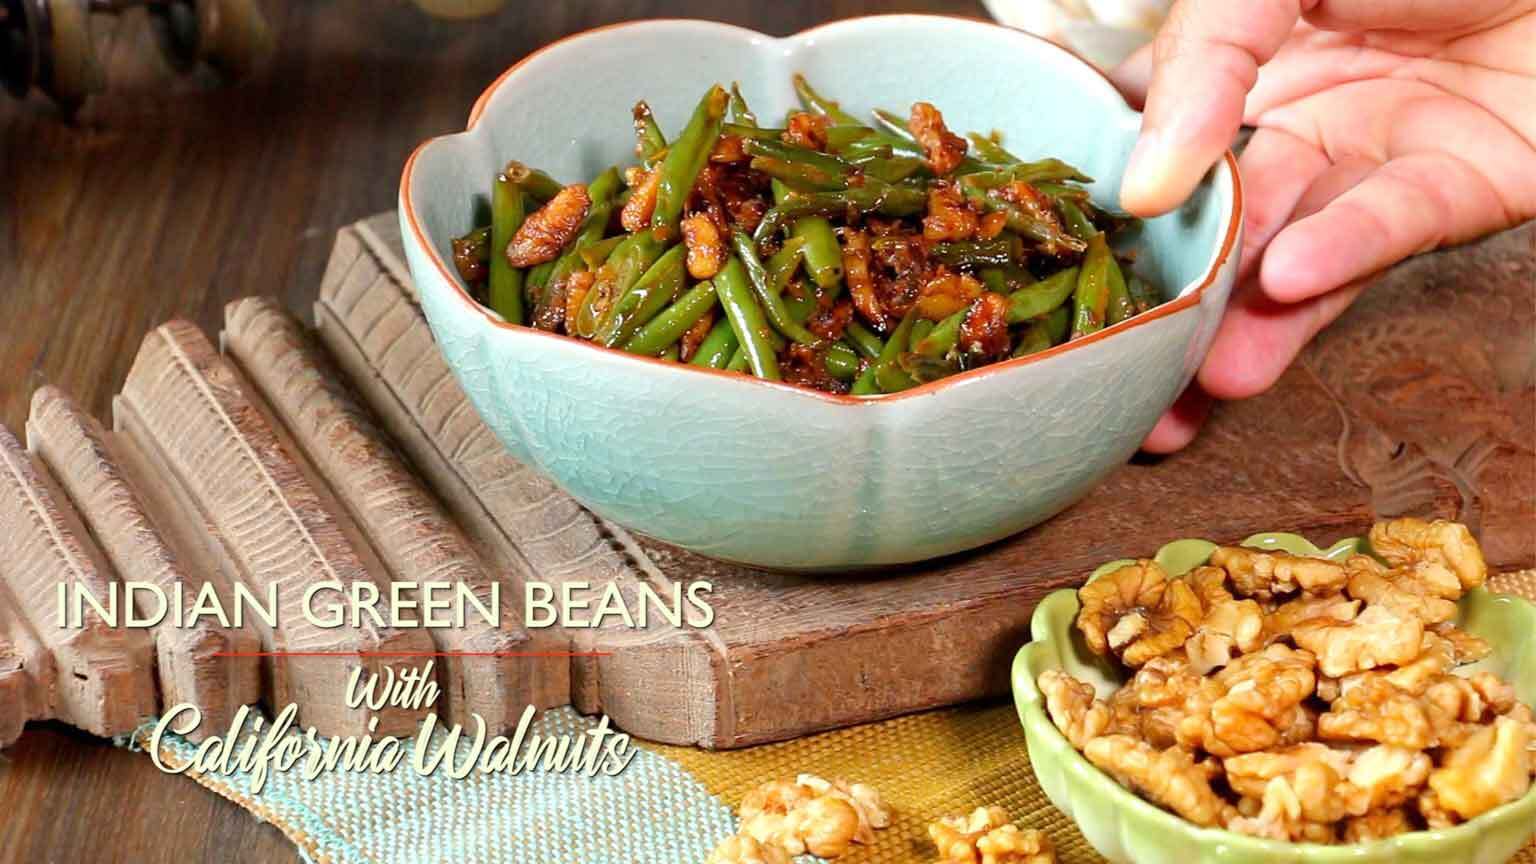 Indian Green Beans with California Walnuts Recipe